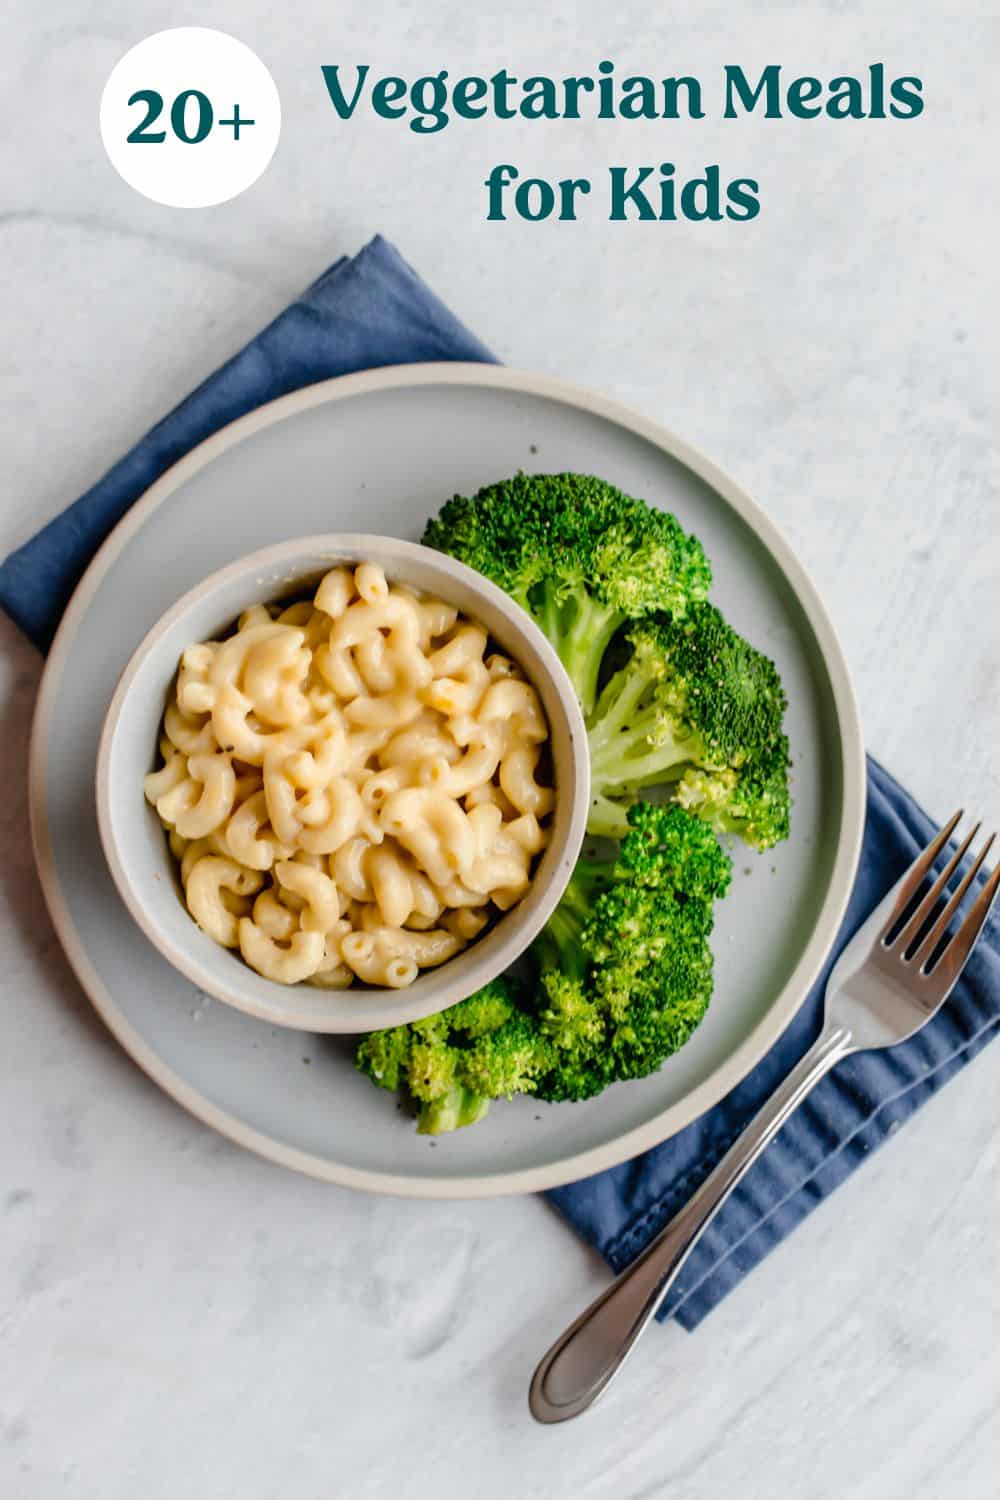 A plate with macaroni and cheese and steamed broccoli on it.